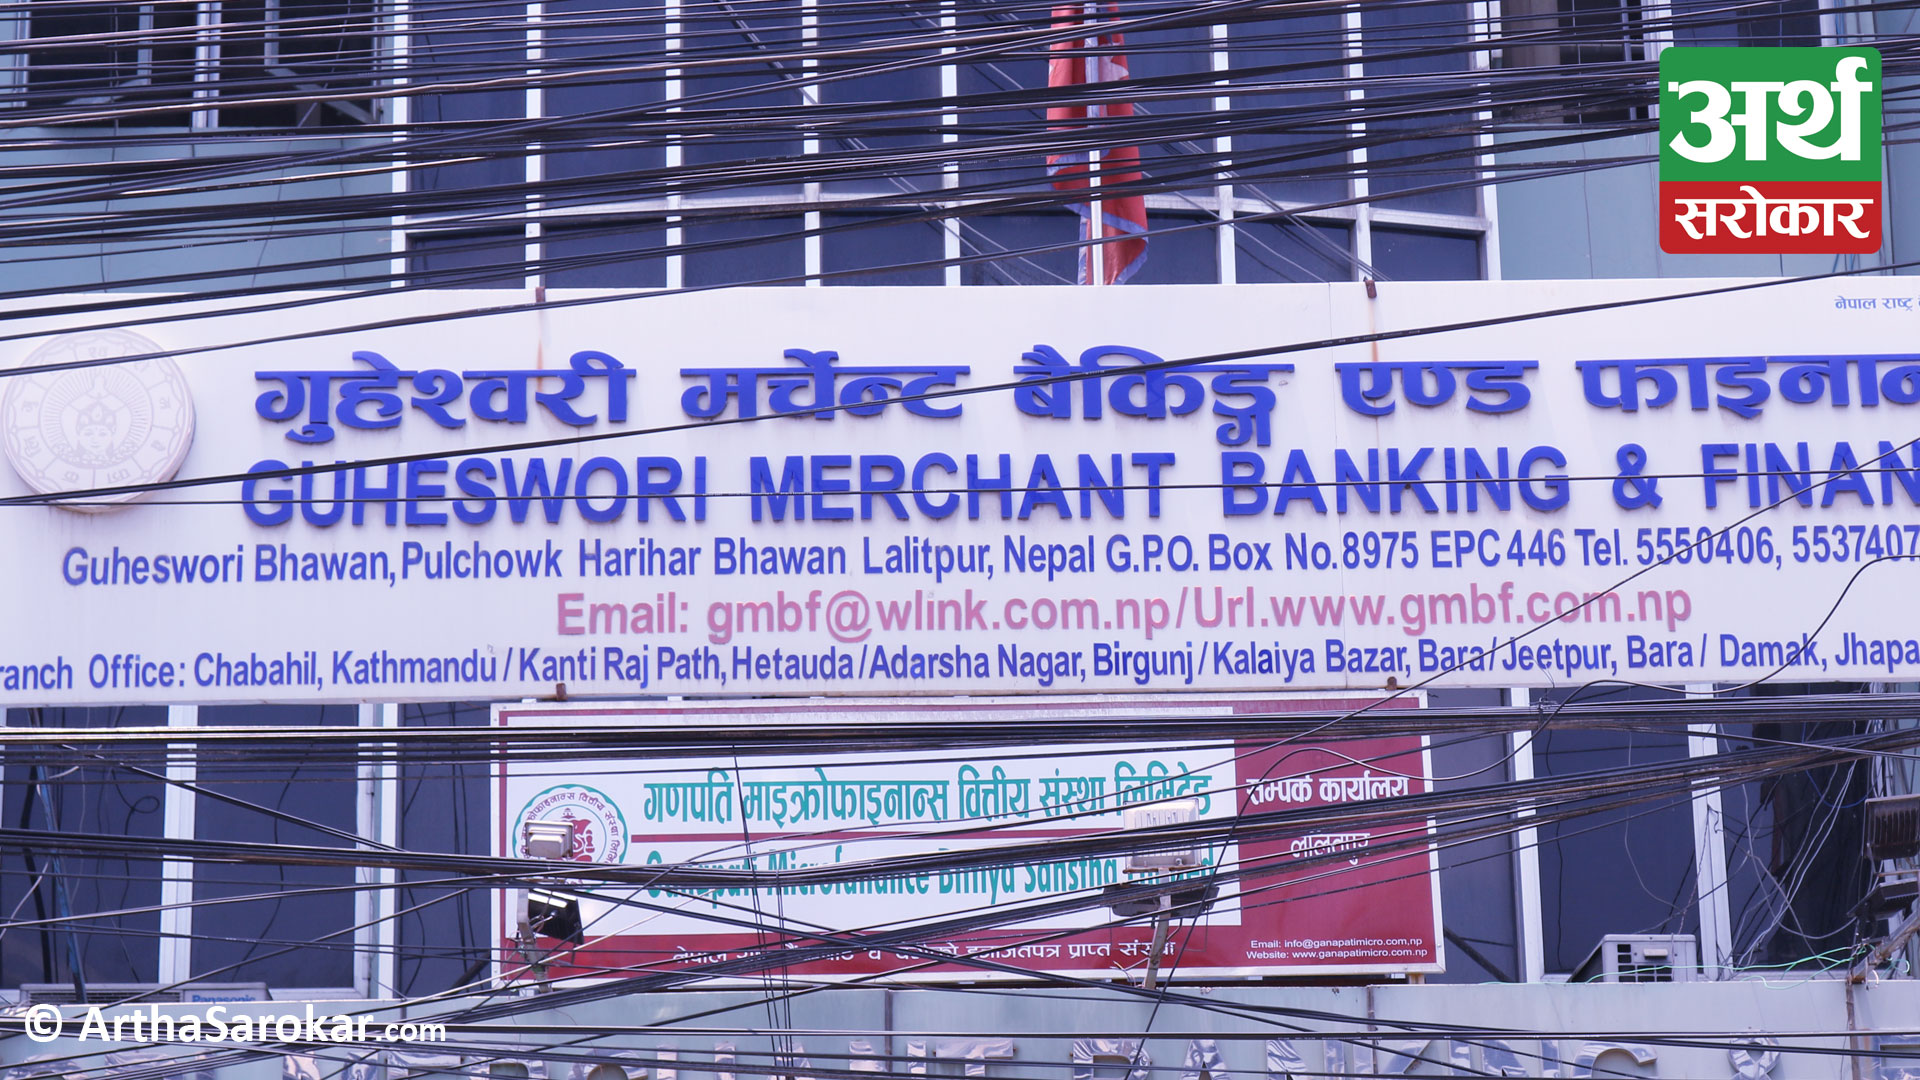 Guheshwari Merchant Banking and Finance Company has started depositing 3.4% cash in the shareholder’s account from today.